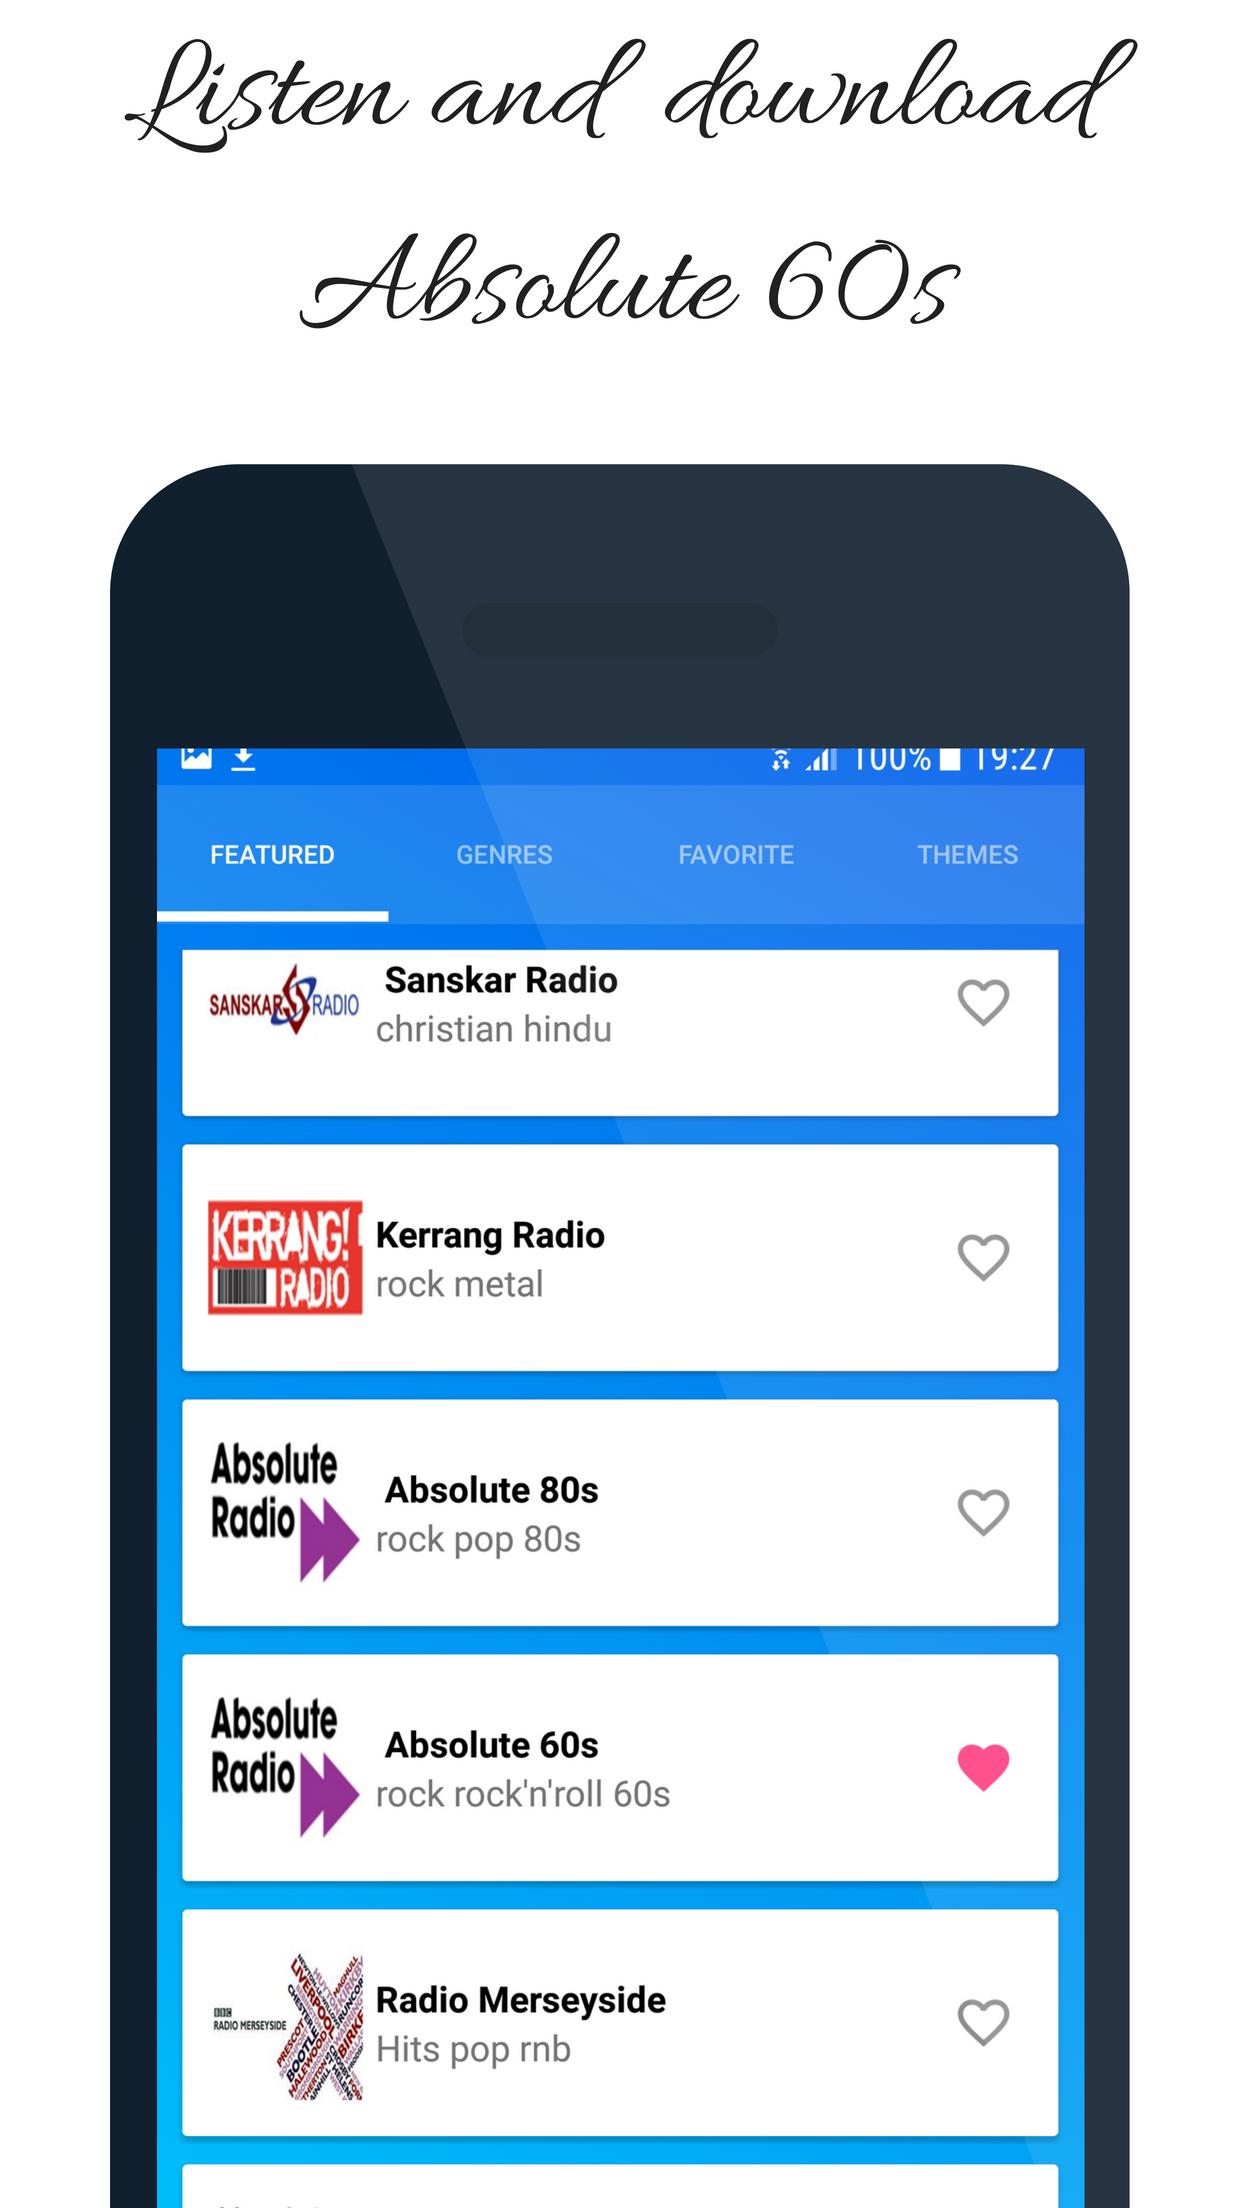 Absolute 60s Radio App Station London UK for Android - APK Download